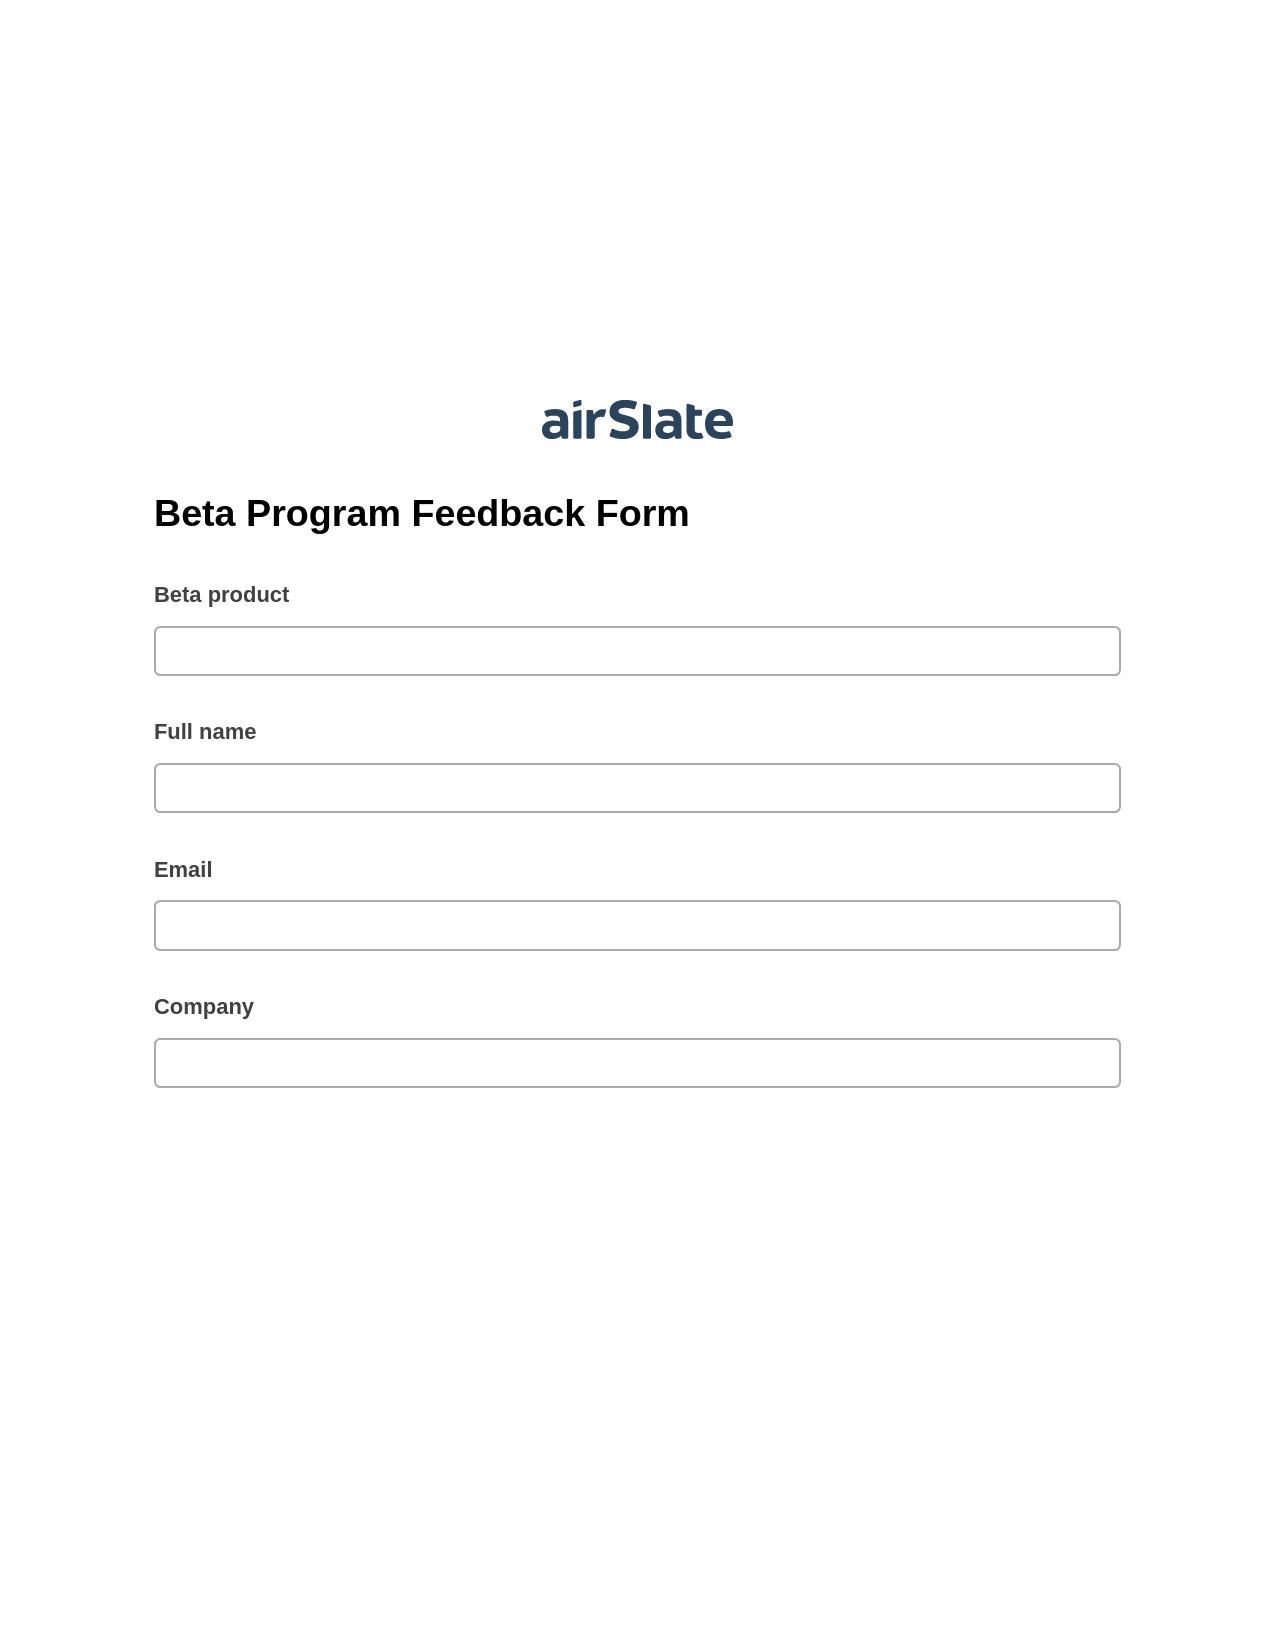 Beta Program Feedback Form Pre-fill from Excel Spreadsheet Bot, Unassign Role Bot, Export to MySQL Bot